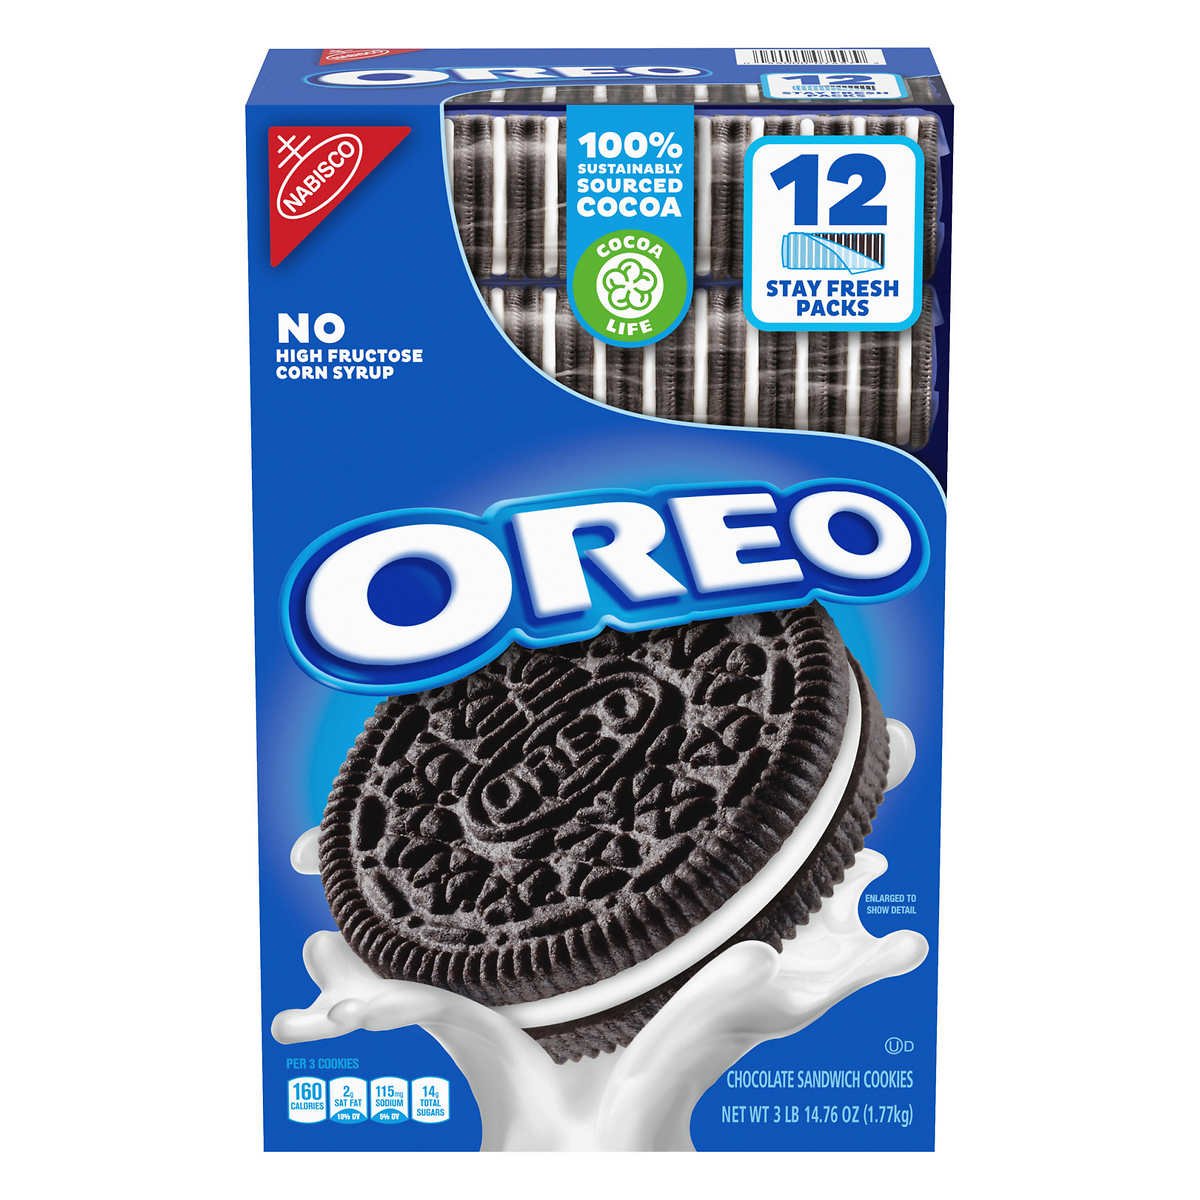 OREO Chocolate Sandwich Cookies, Stay Fresh Packs, 12 Count (62.76 Ounce)